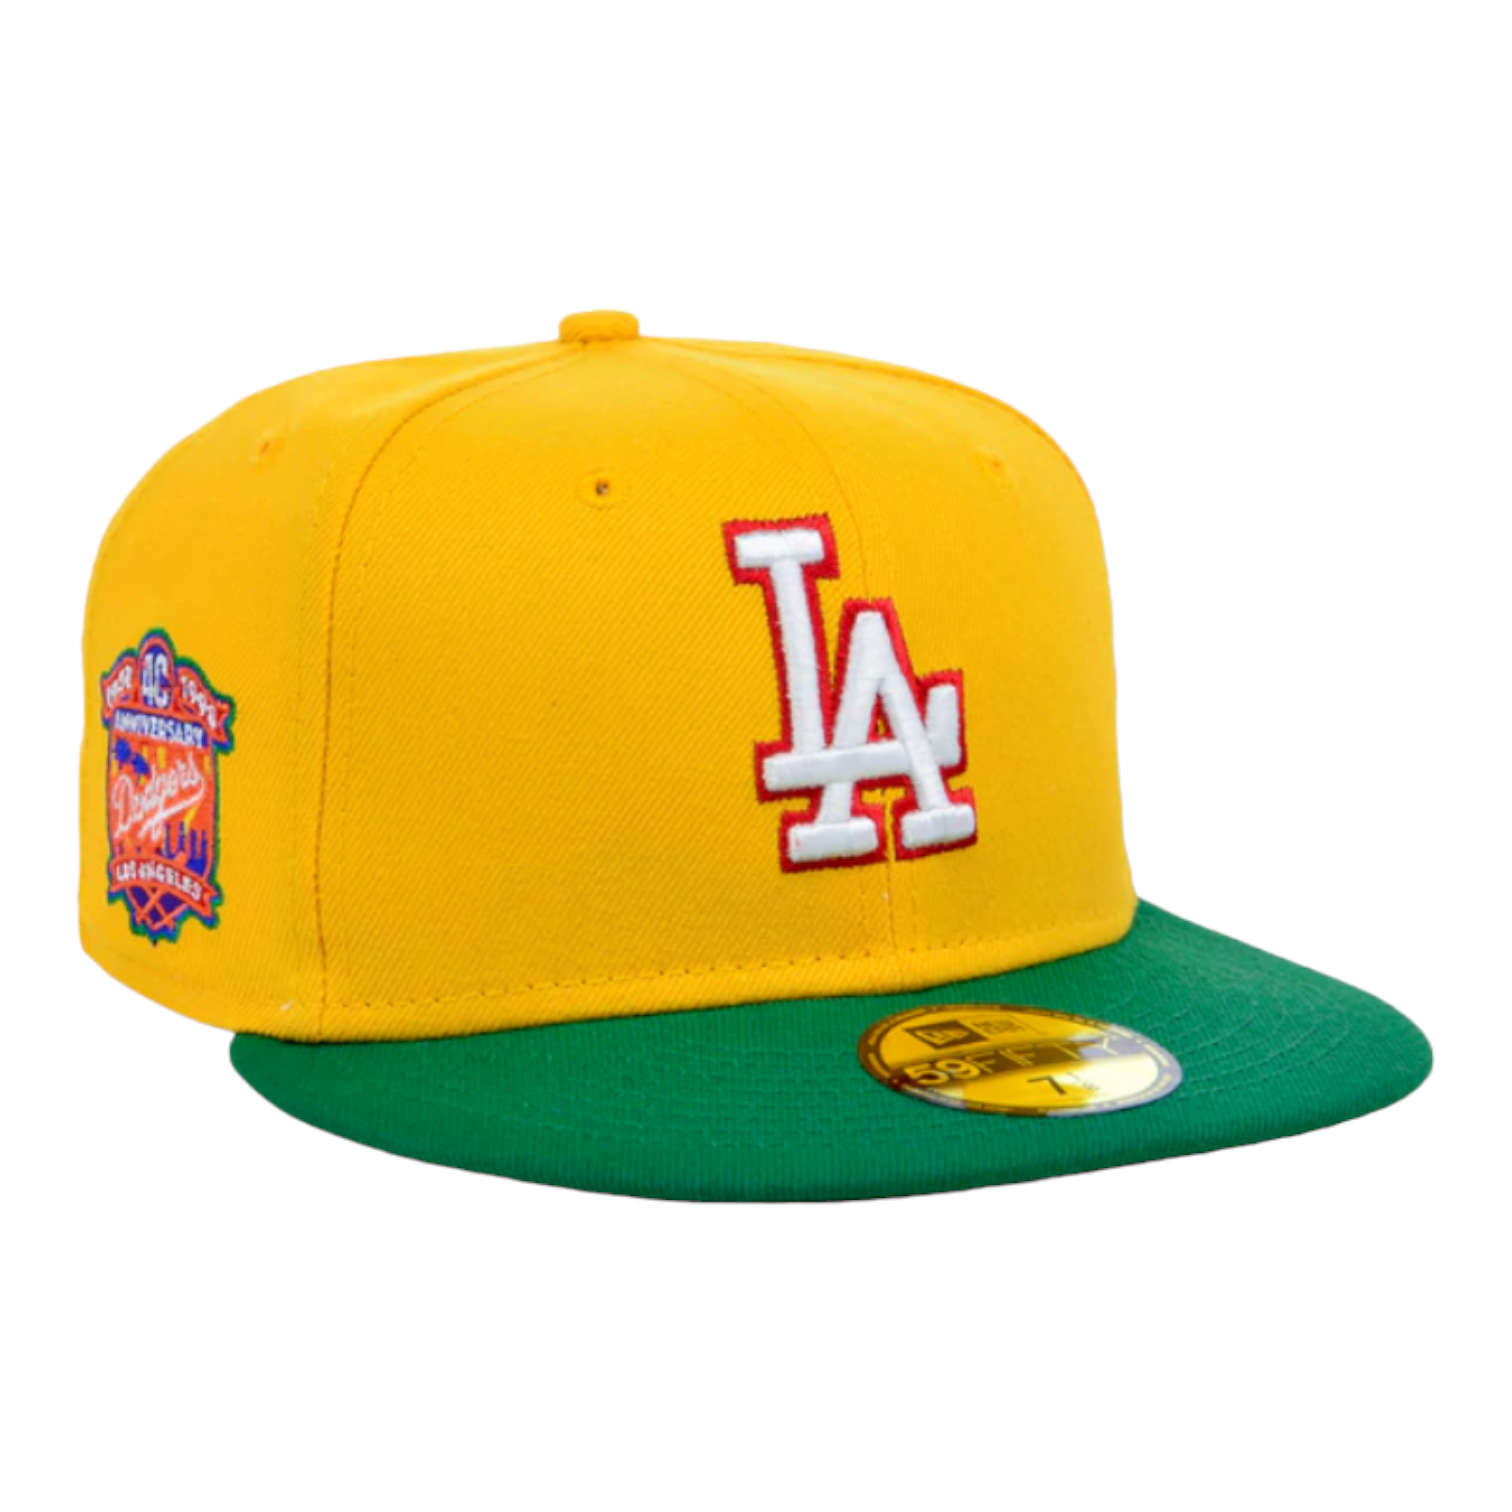 Los angeles dodgers crayola school supplies fifty fitted hat